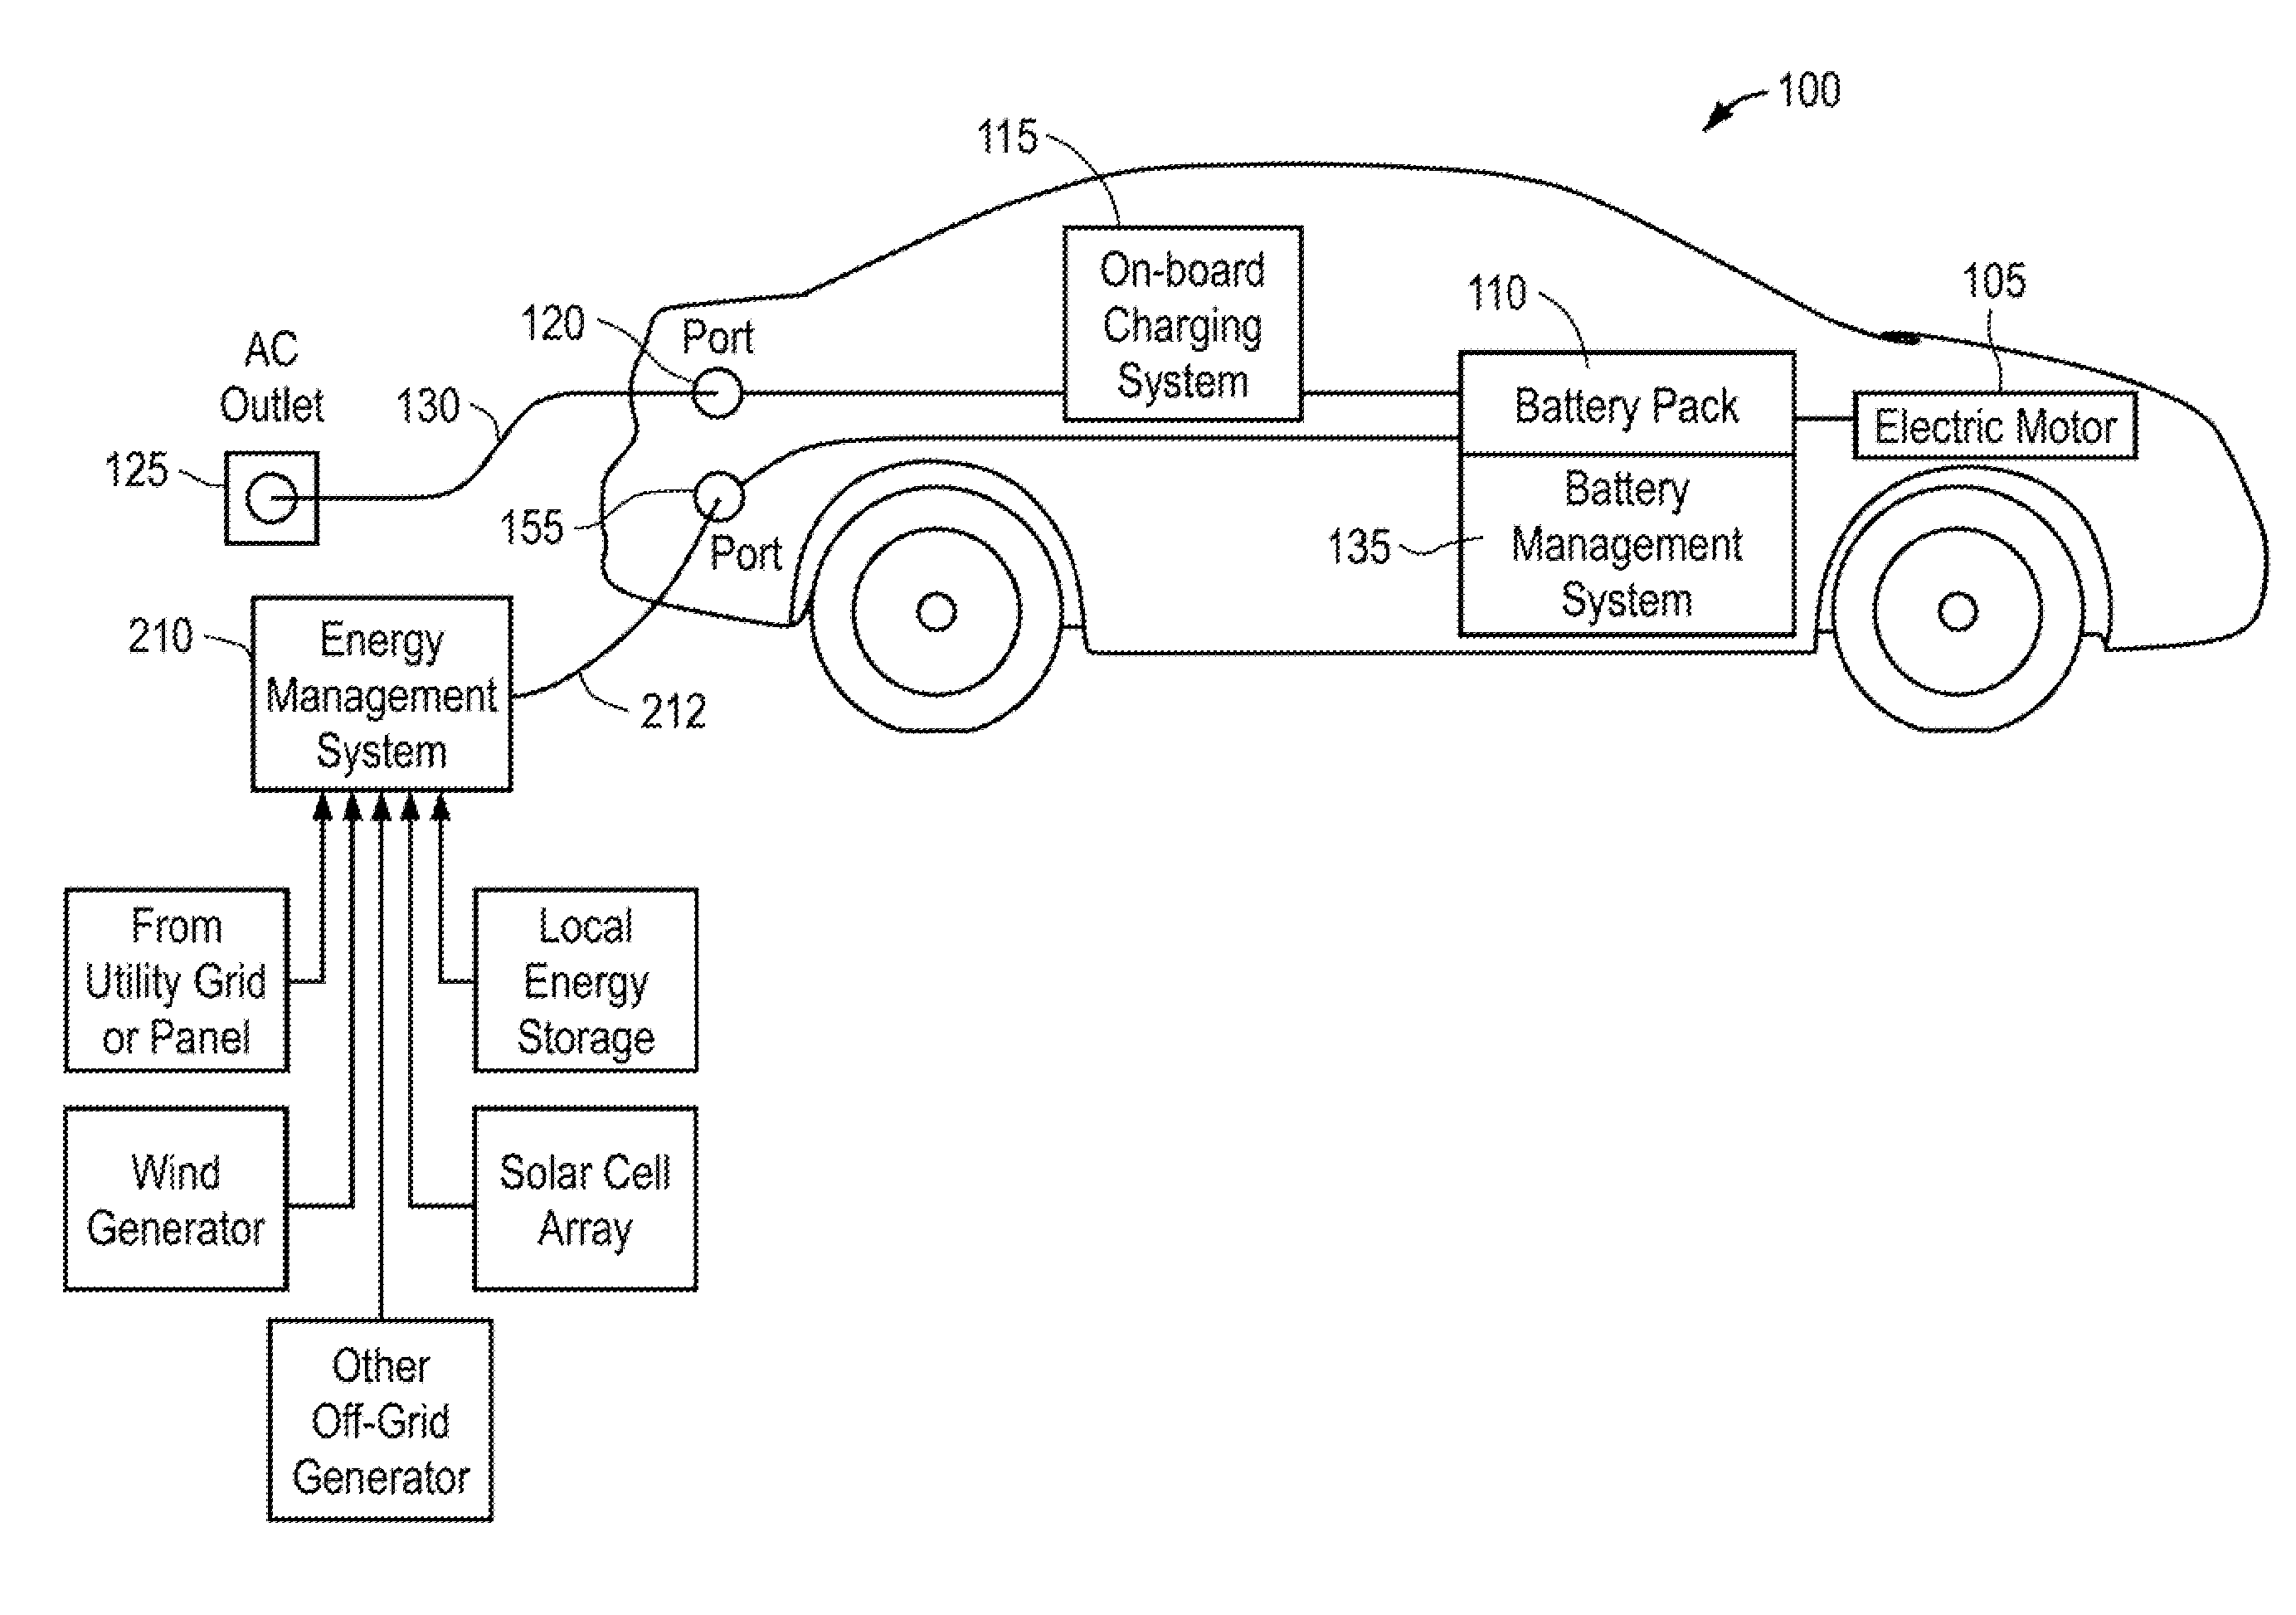 Multi-use energy management and conversion system including electric vehicle charging